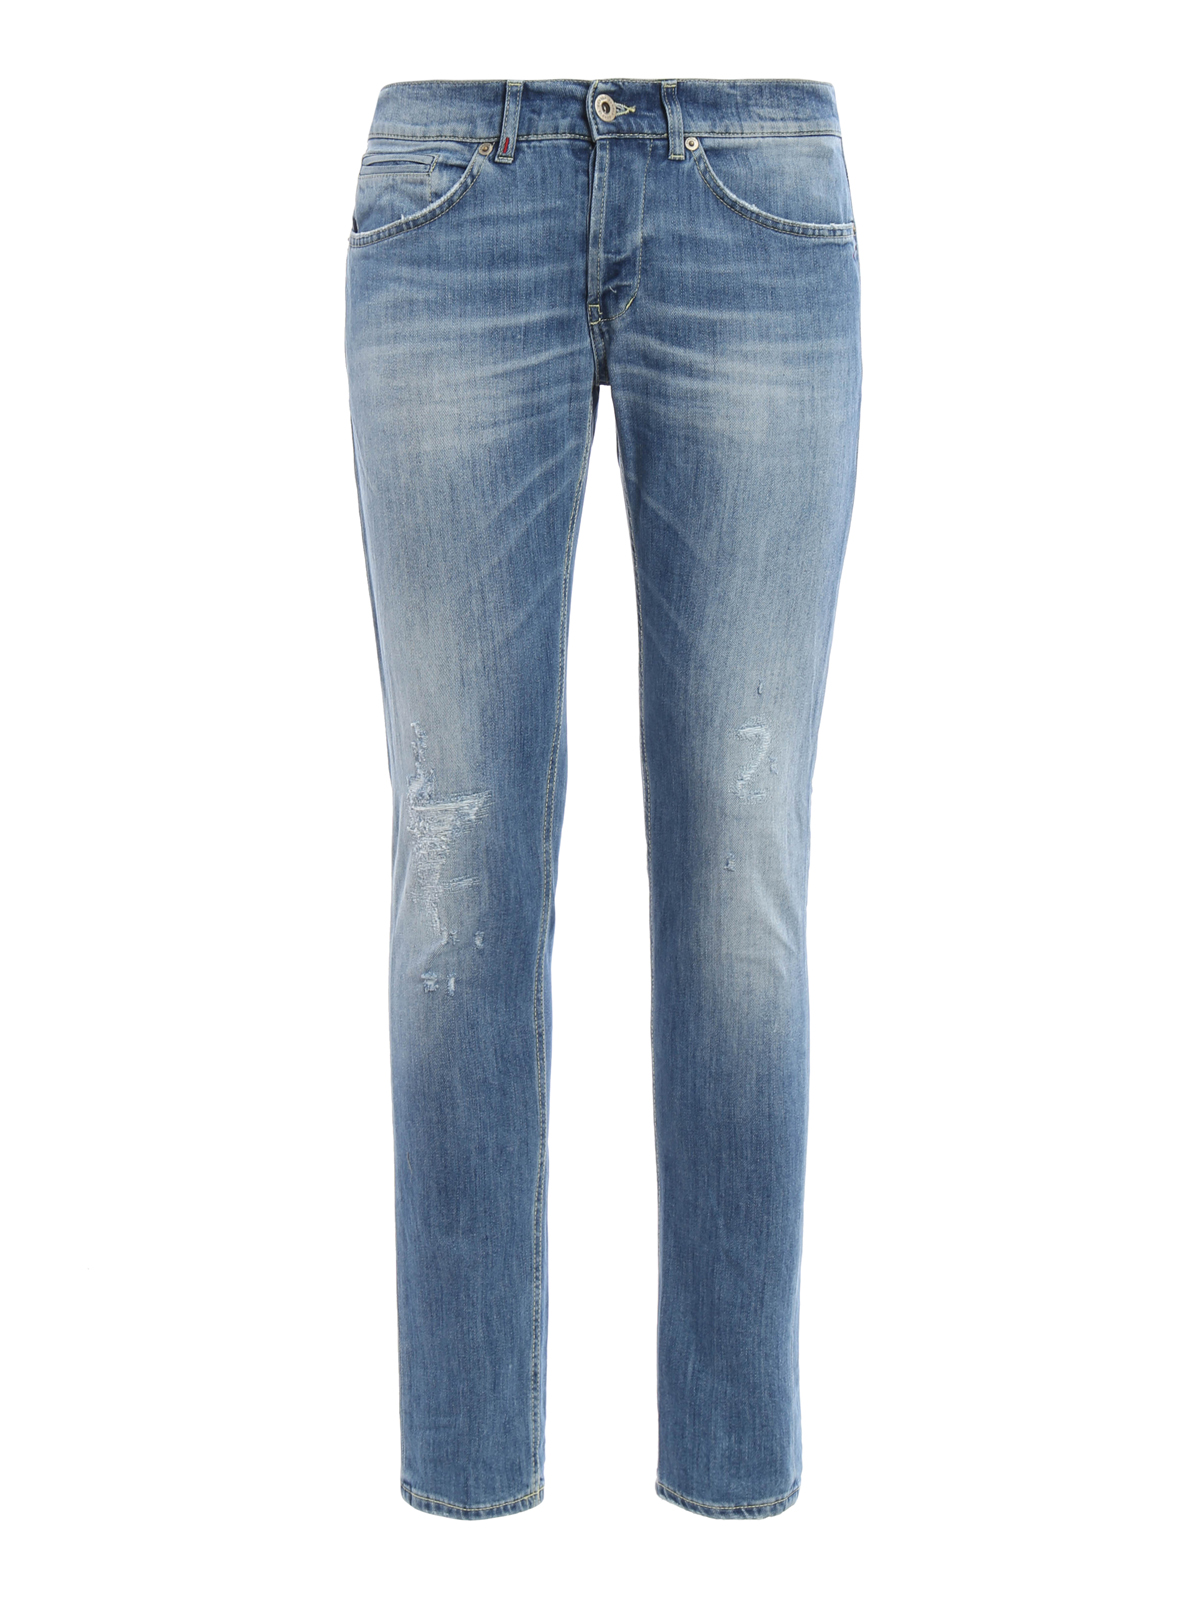 Skinny jeans Dondup - George worn out stretch jeans - UP232DS107UO29G800